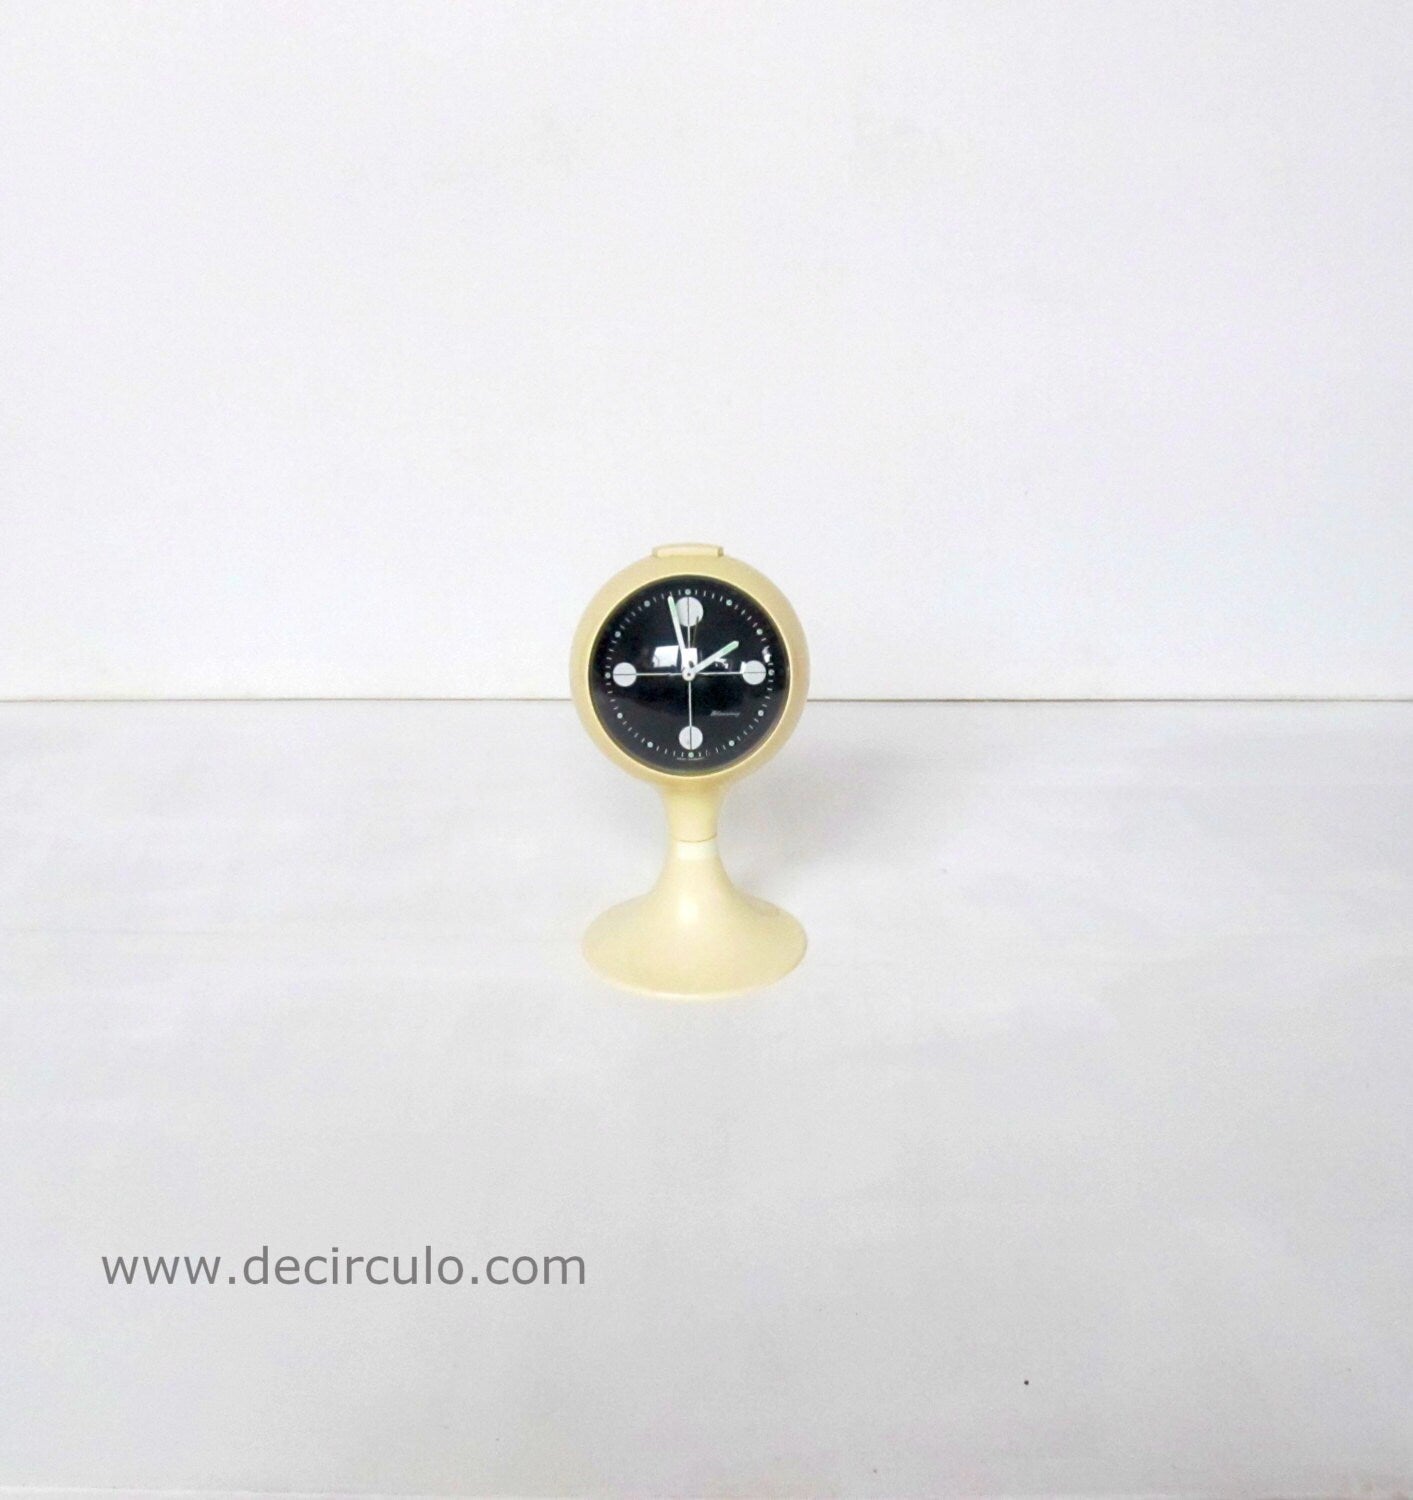 Blessing alarm clock, white pedestal tulip shape, made in Germany. Space age era, made of plastic from the early 1970s